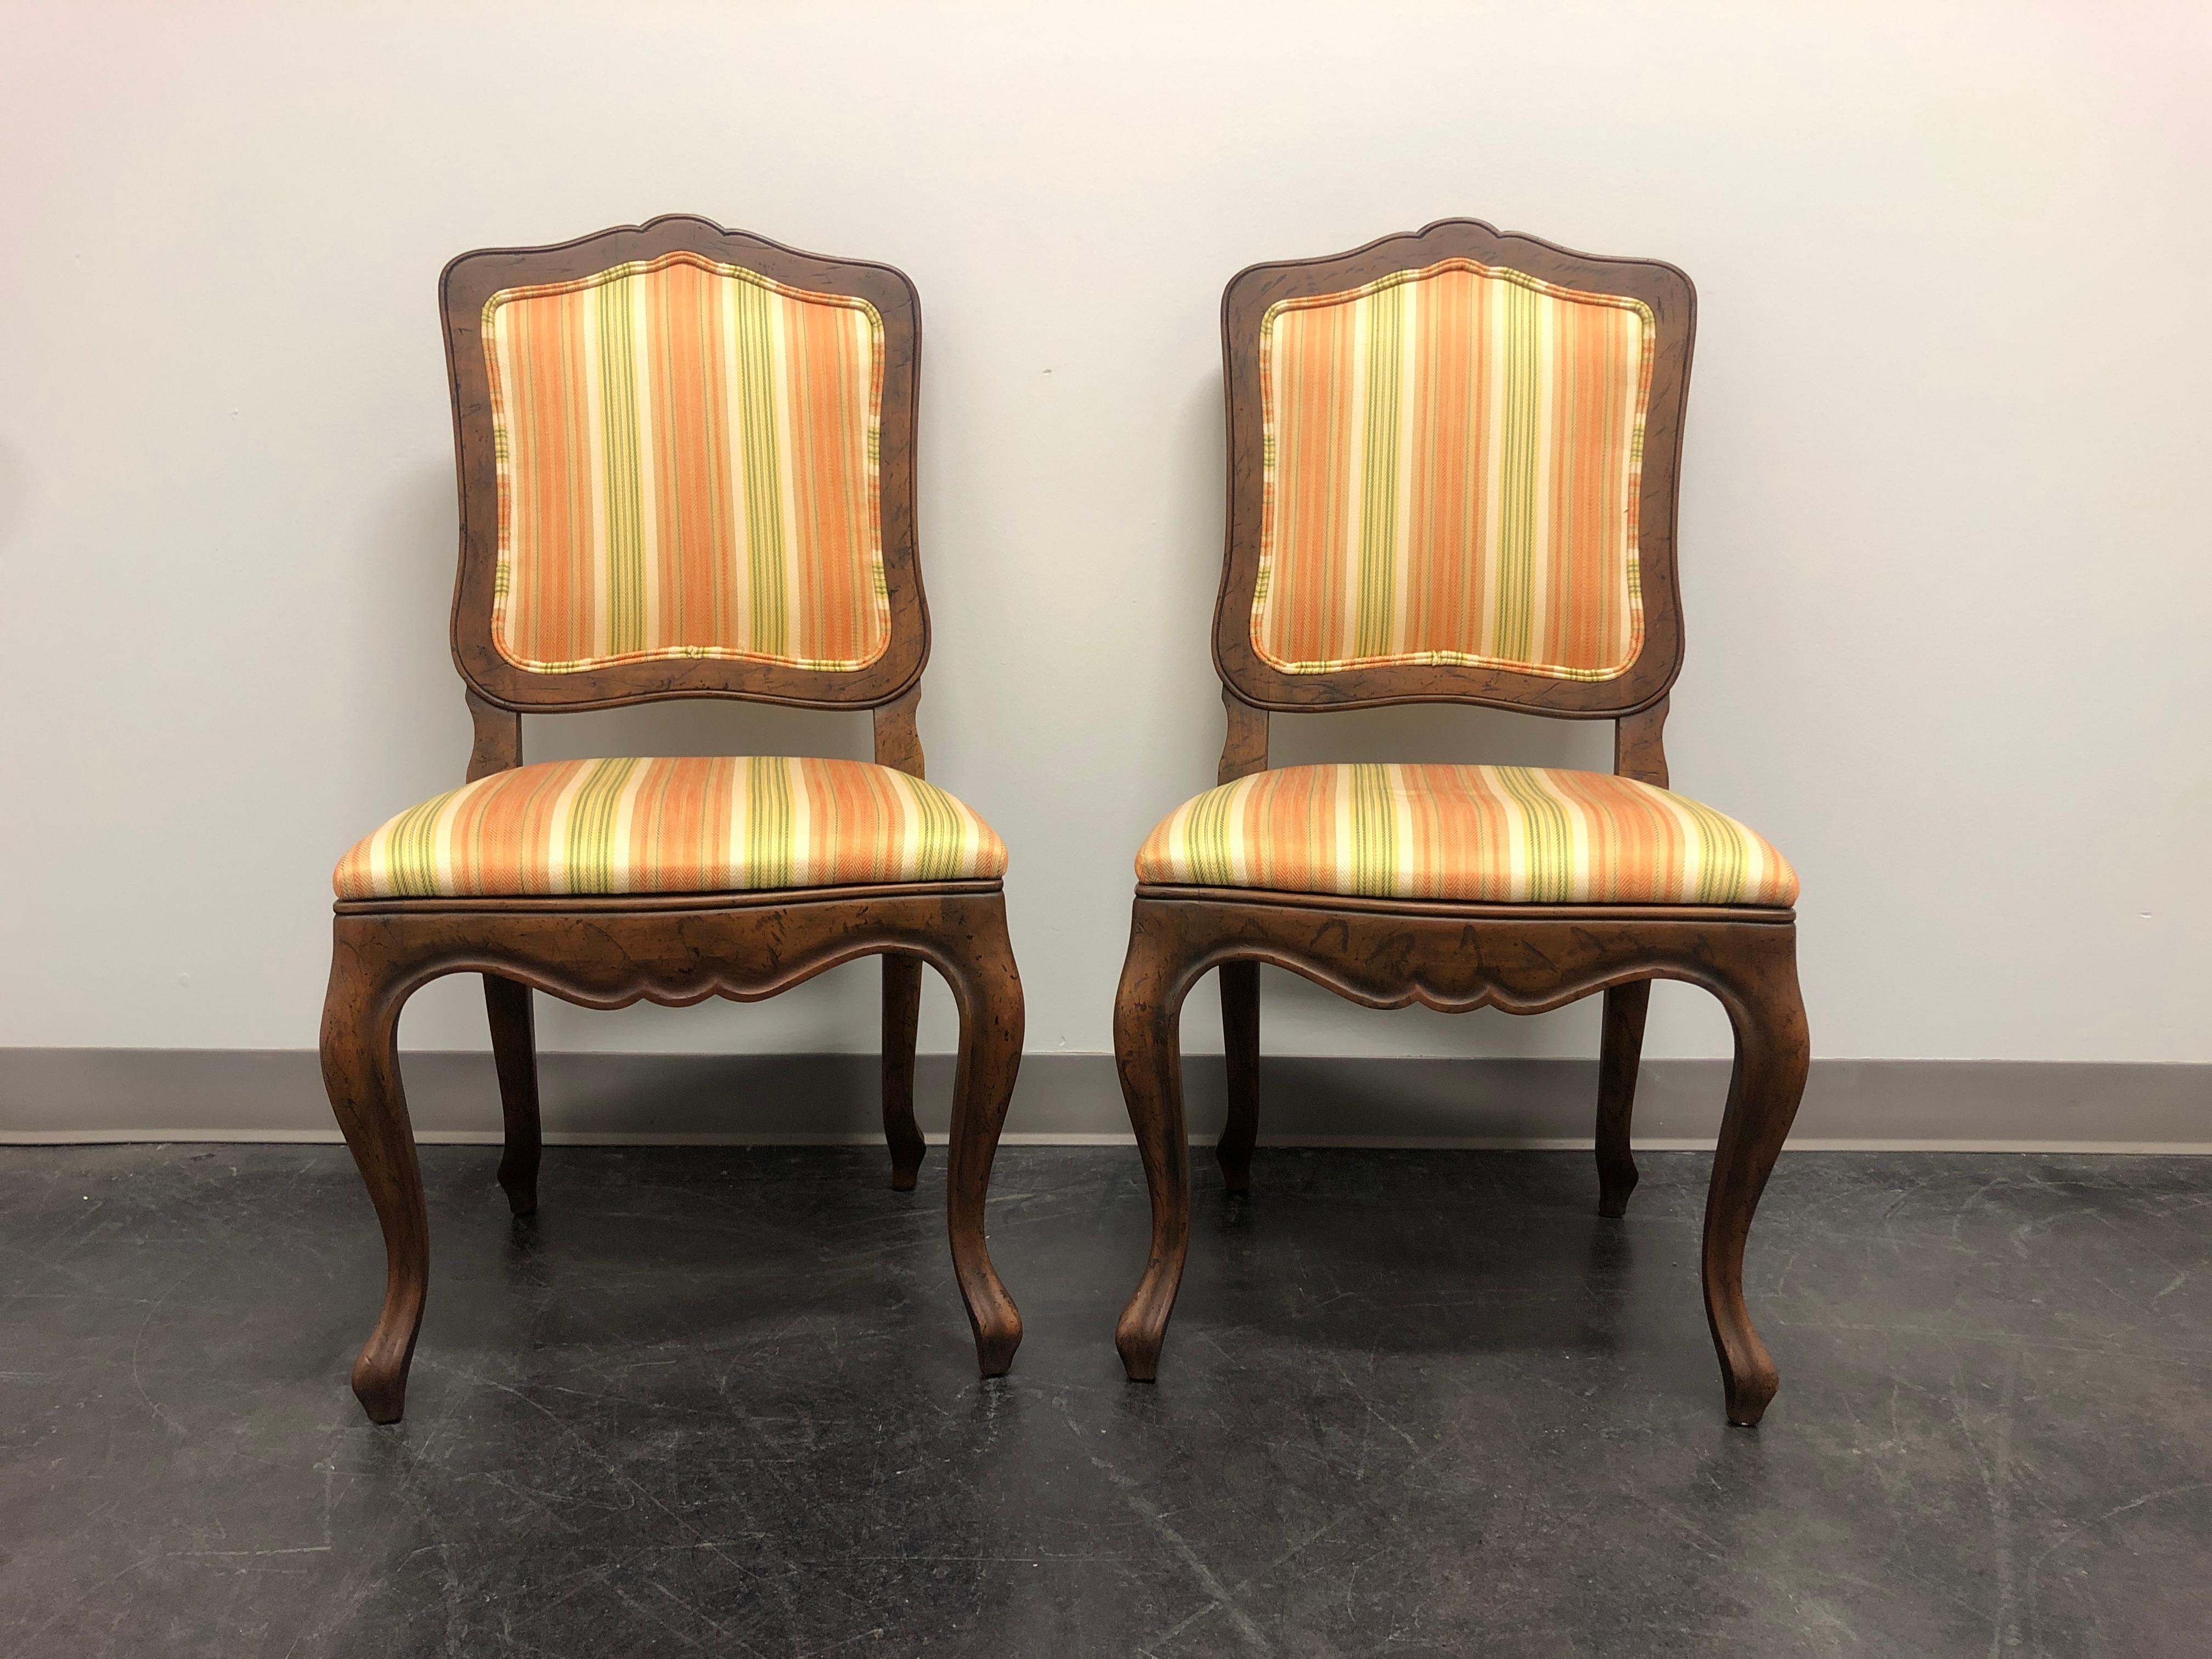 BAKER French Country Style Dining Side Chairs - Pair C 6